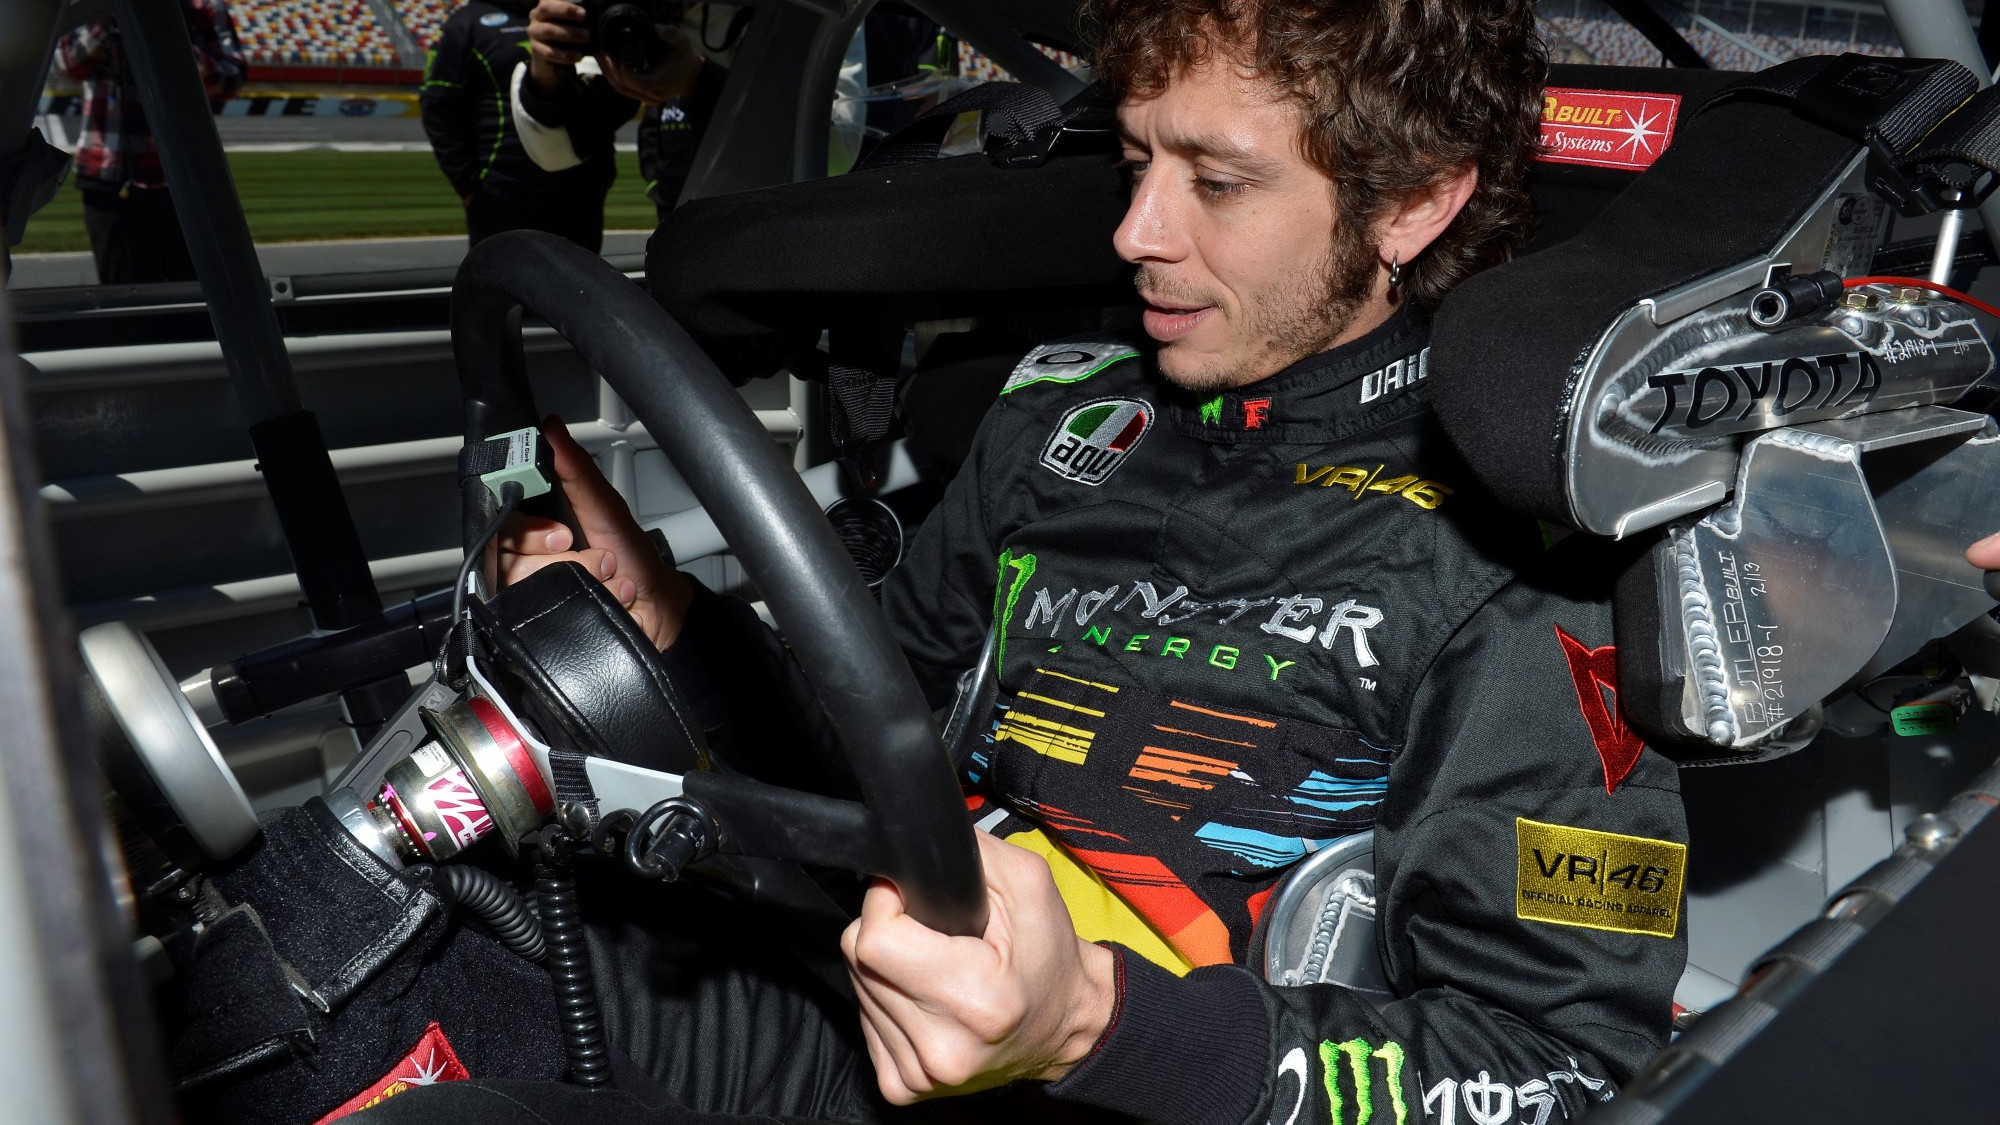 Valentino Rossi tests Kyle Busch's NASCAR Nationwide Toyota Camry